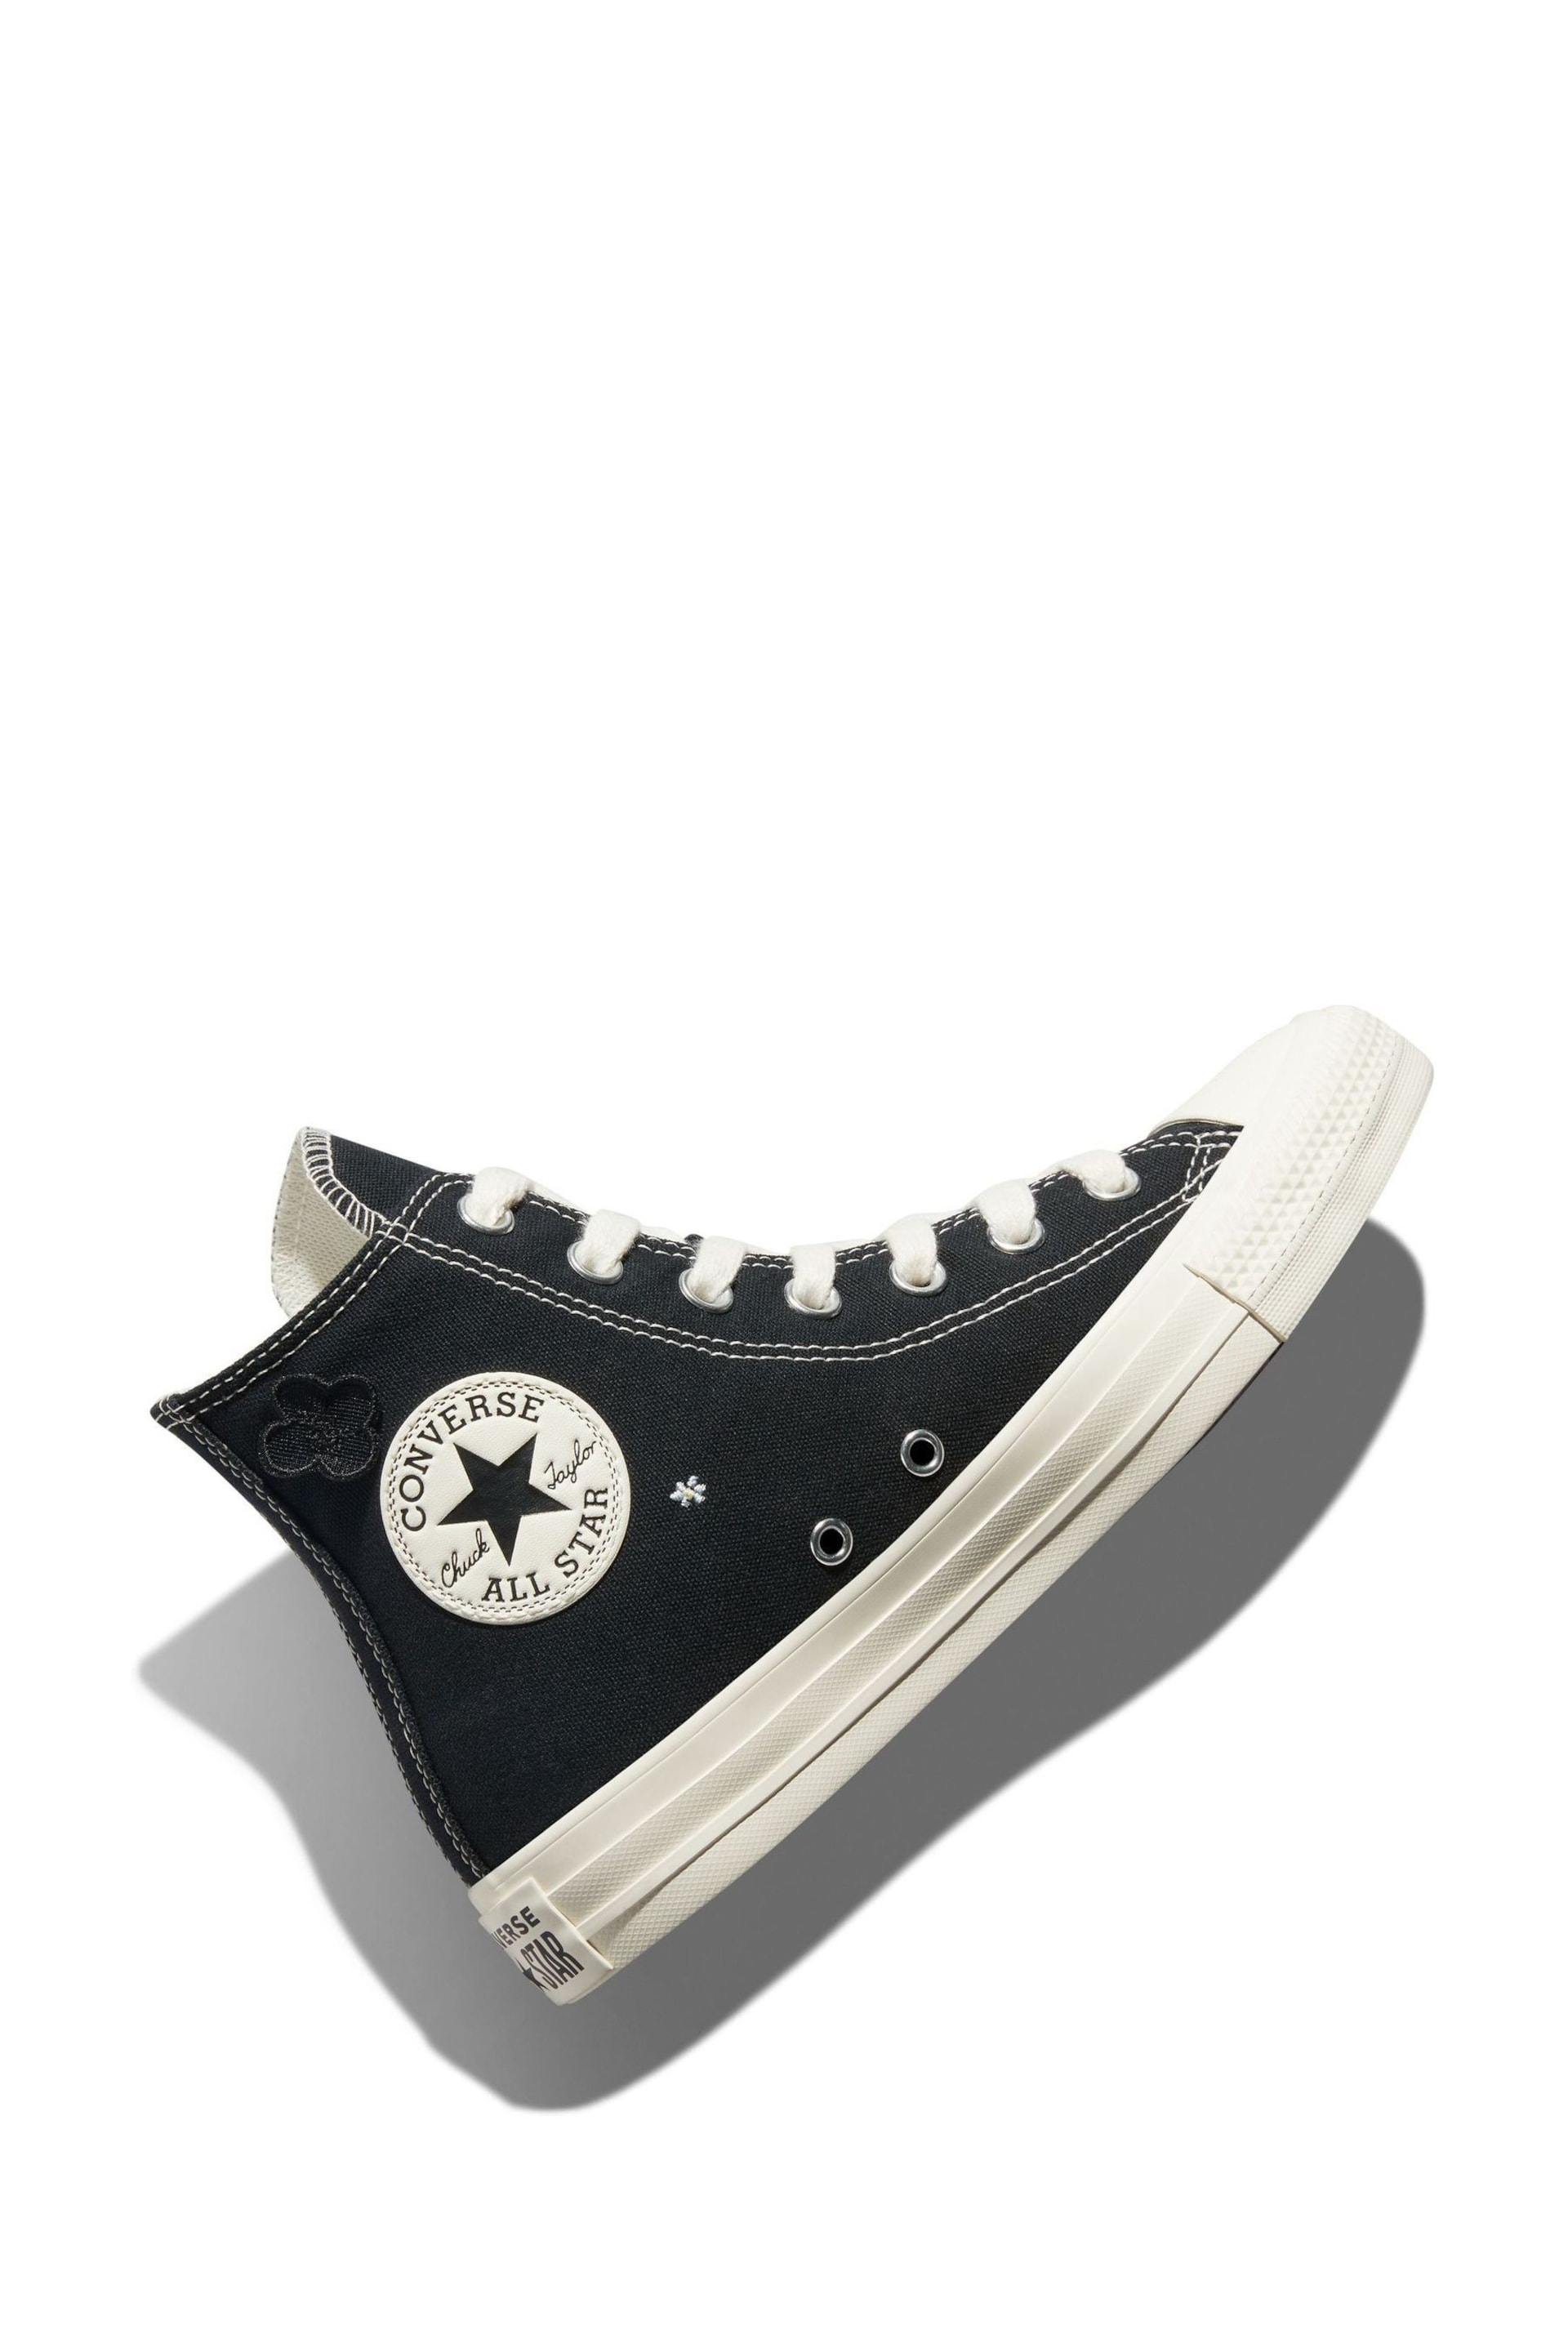 Converse Black Floral Embroidered High Top Trainers - Image 6 of 13